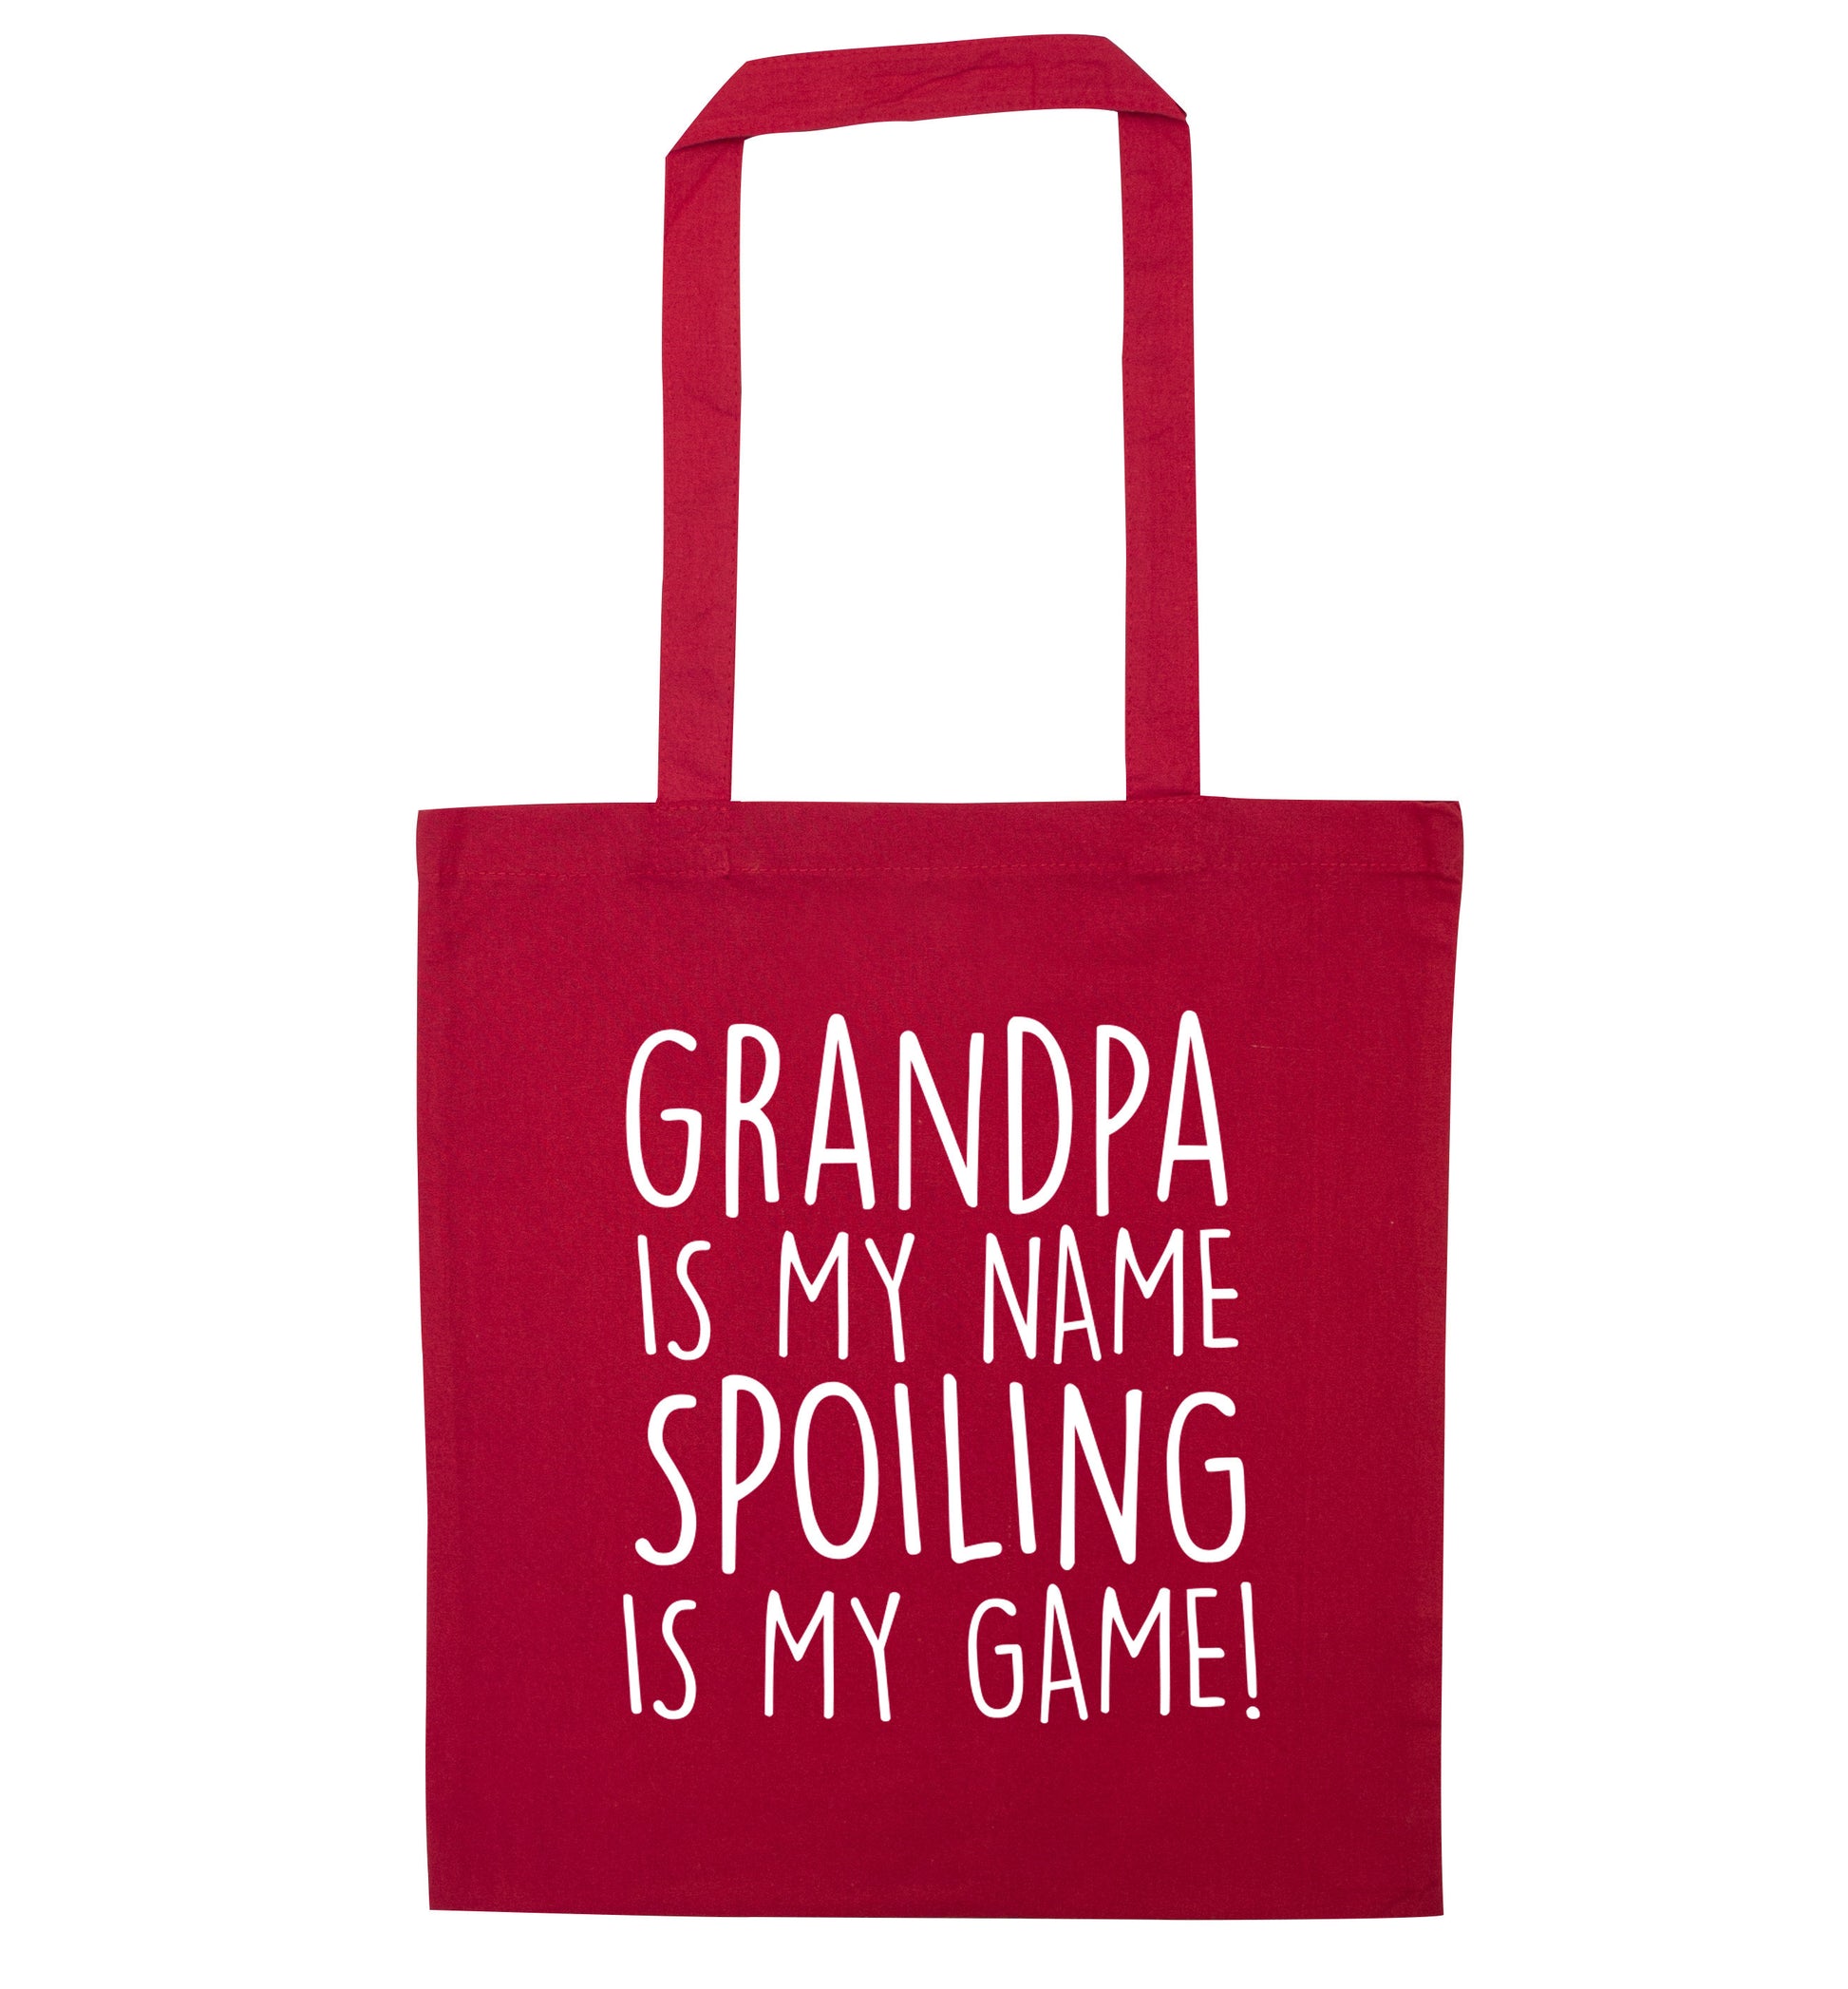 Grandpa is my name, spoiling is my game red tote bag